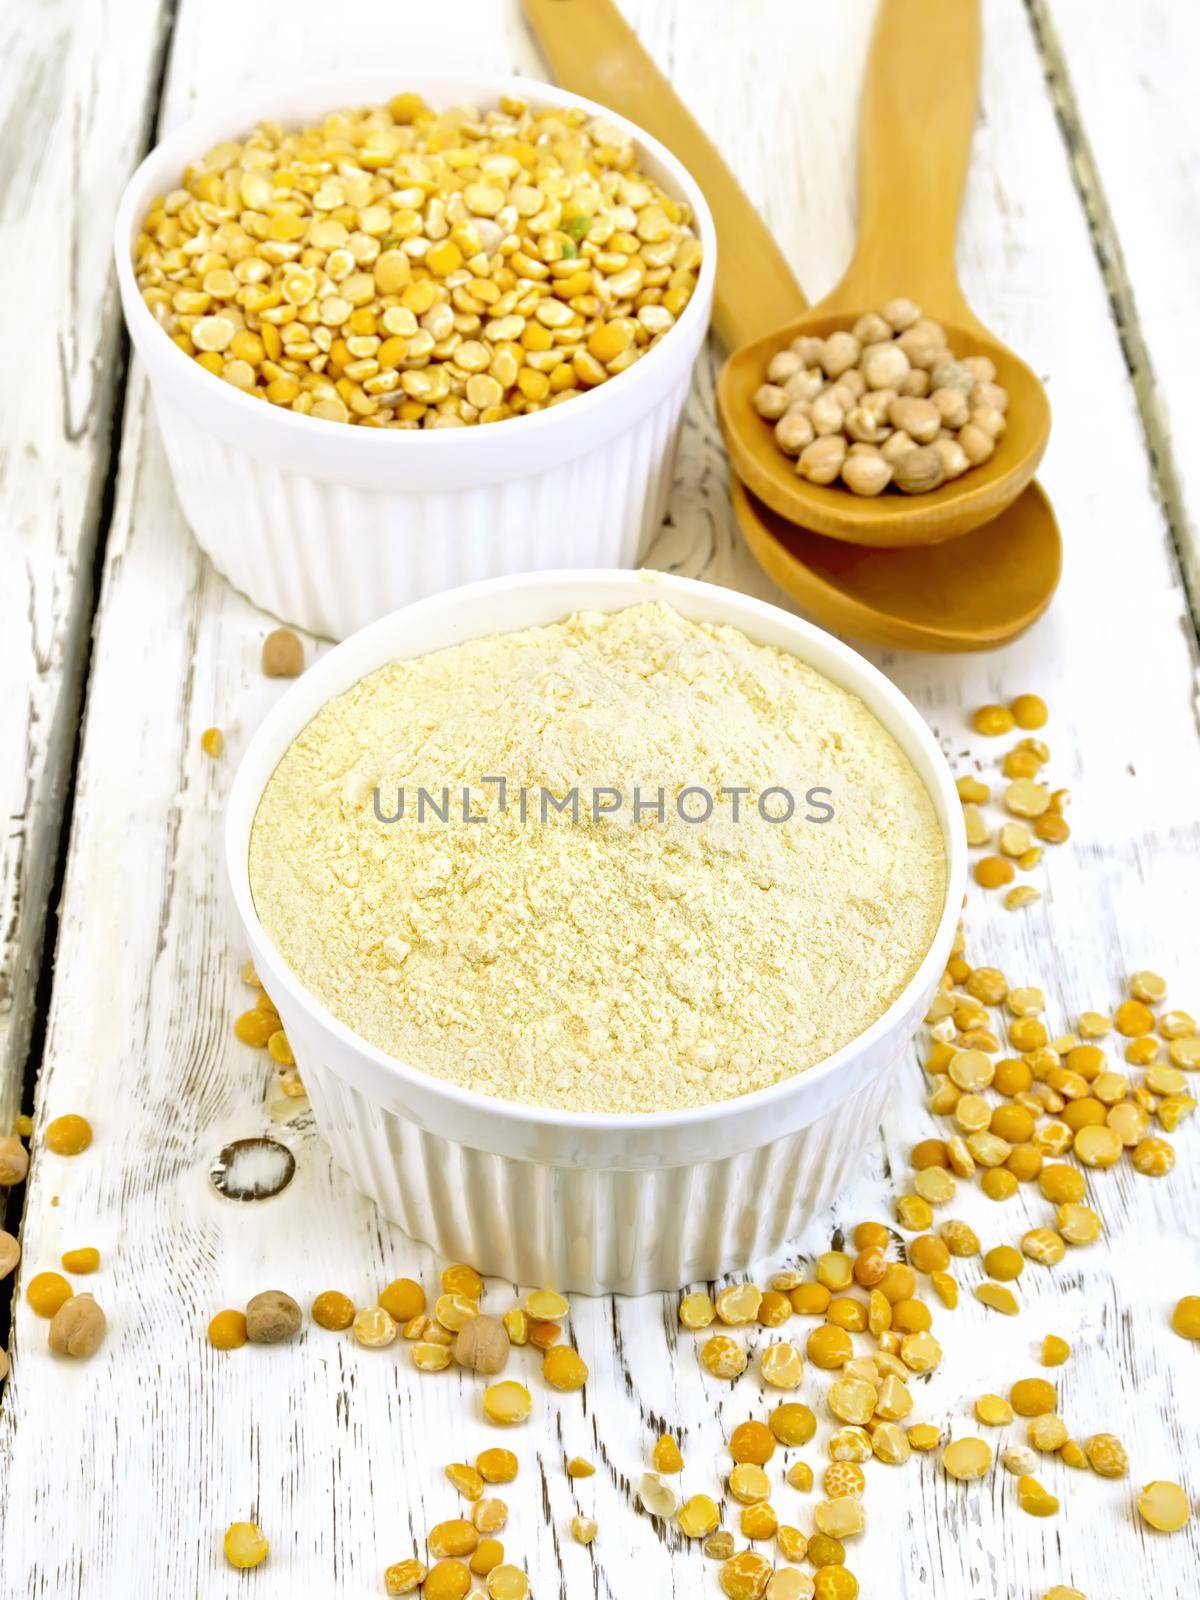 Flour pea and split pease in bowls on table by rezkrr